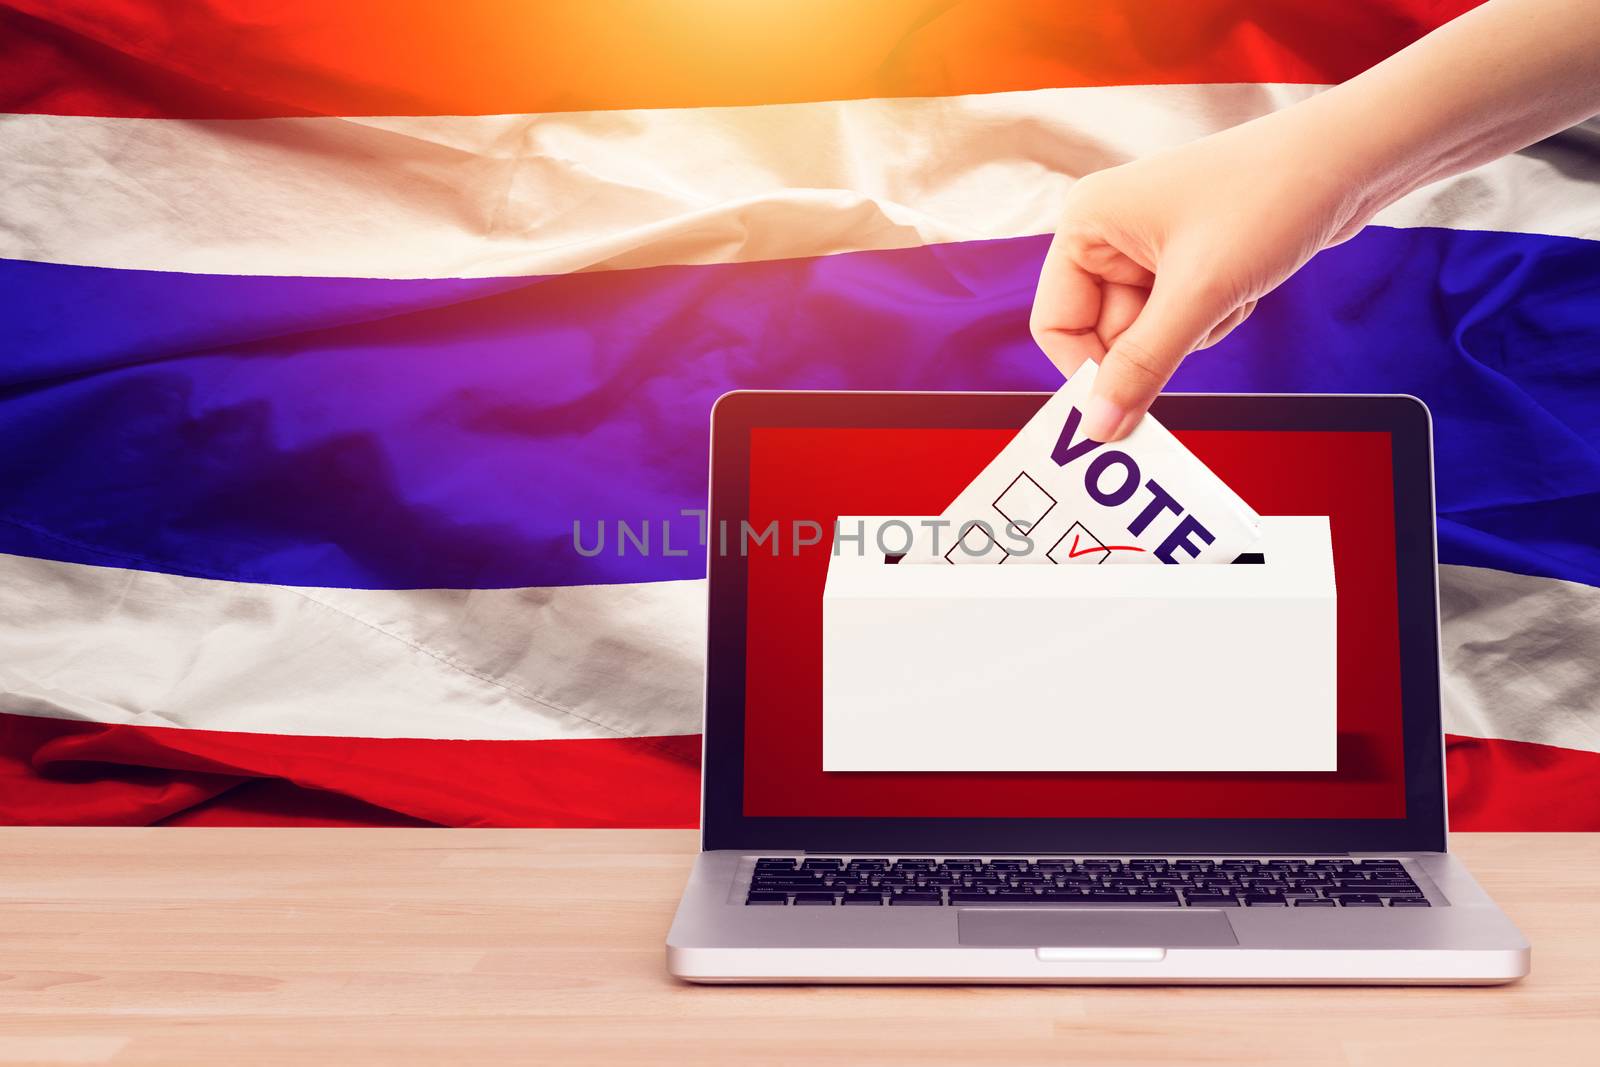 online vote , poll, exit poll for Thailand general election concept. close up hand of a person casting a ballot at elections during voting on canvas Thailand flag background.